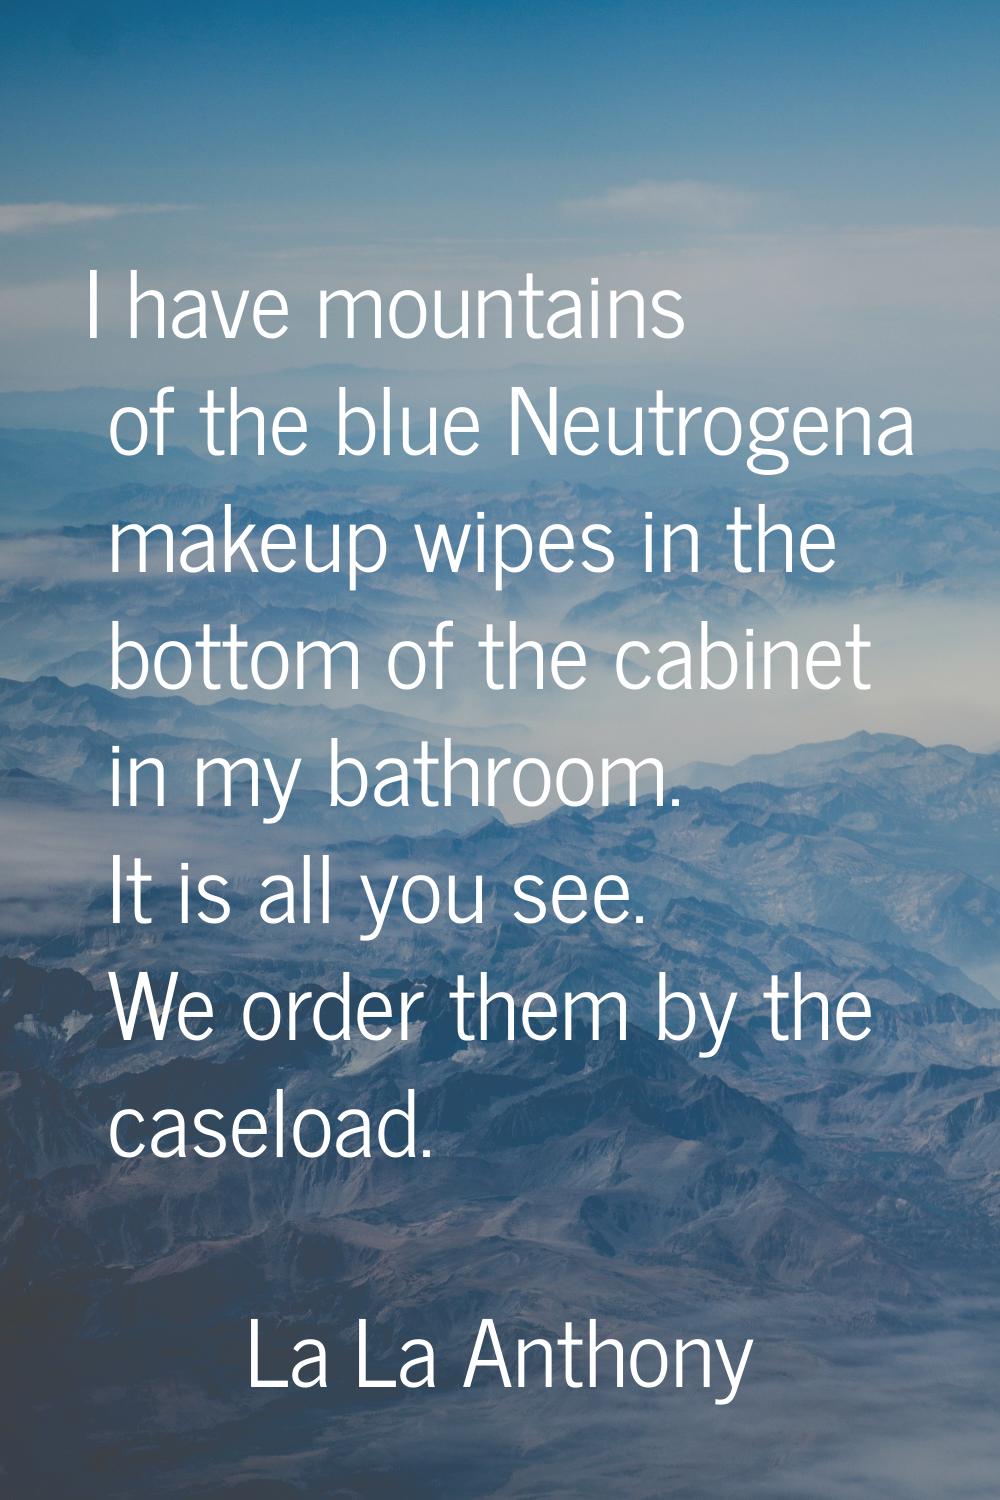 I have mountains of the blue Neutrogena makeup wipes in the bottom of the cabinet in my bathroom. I